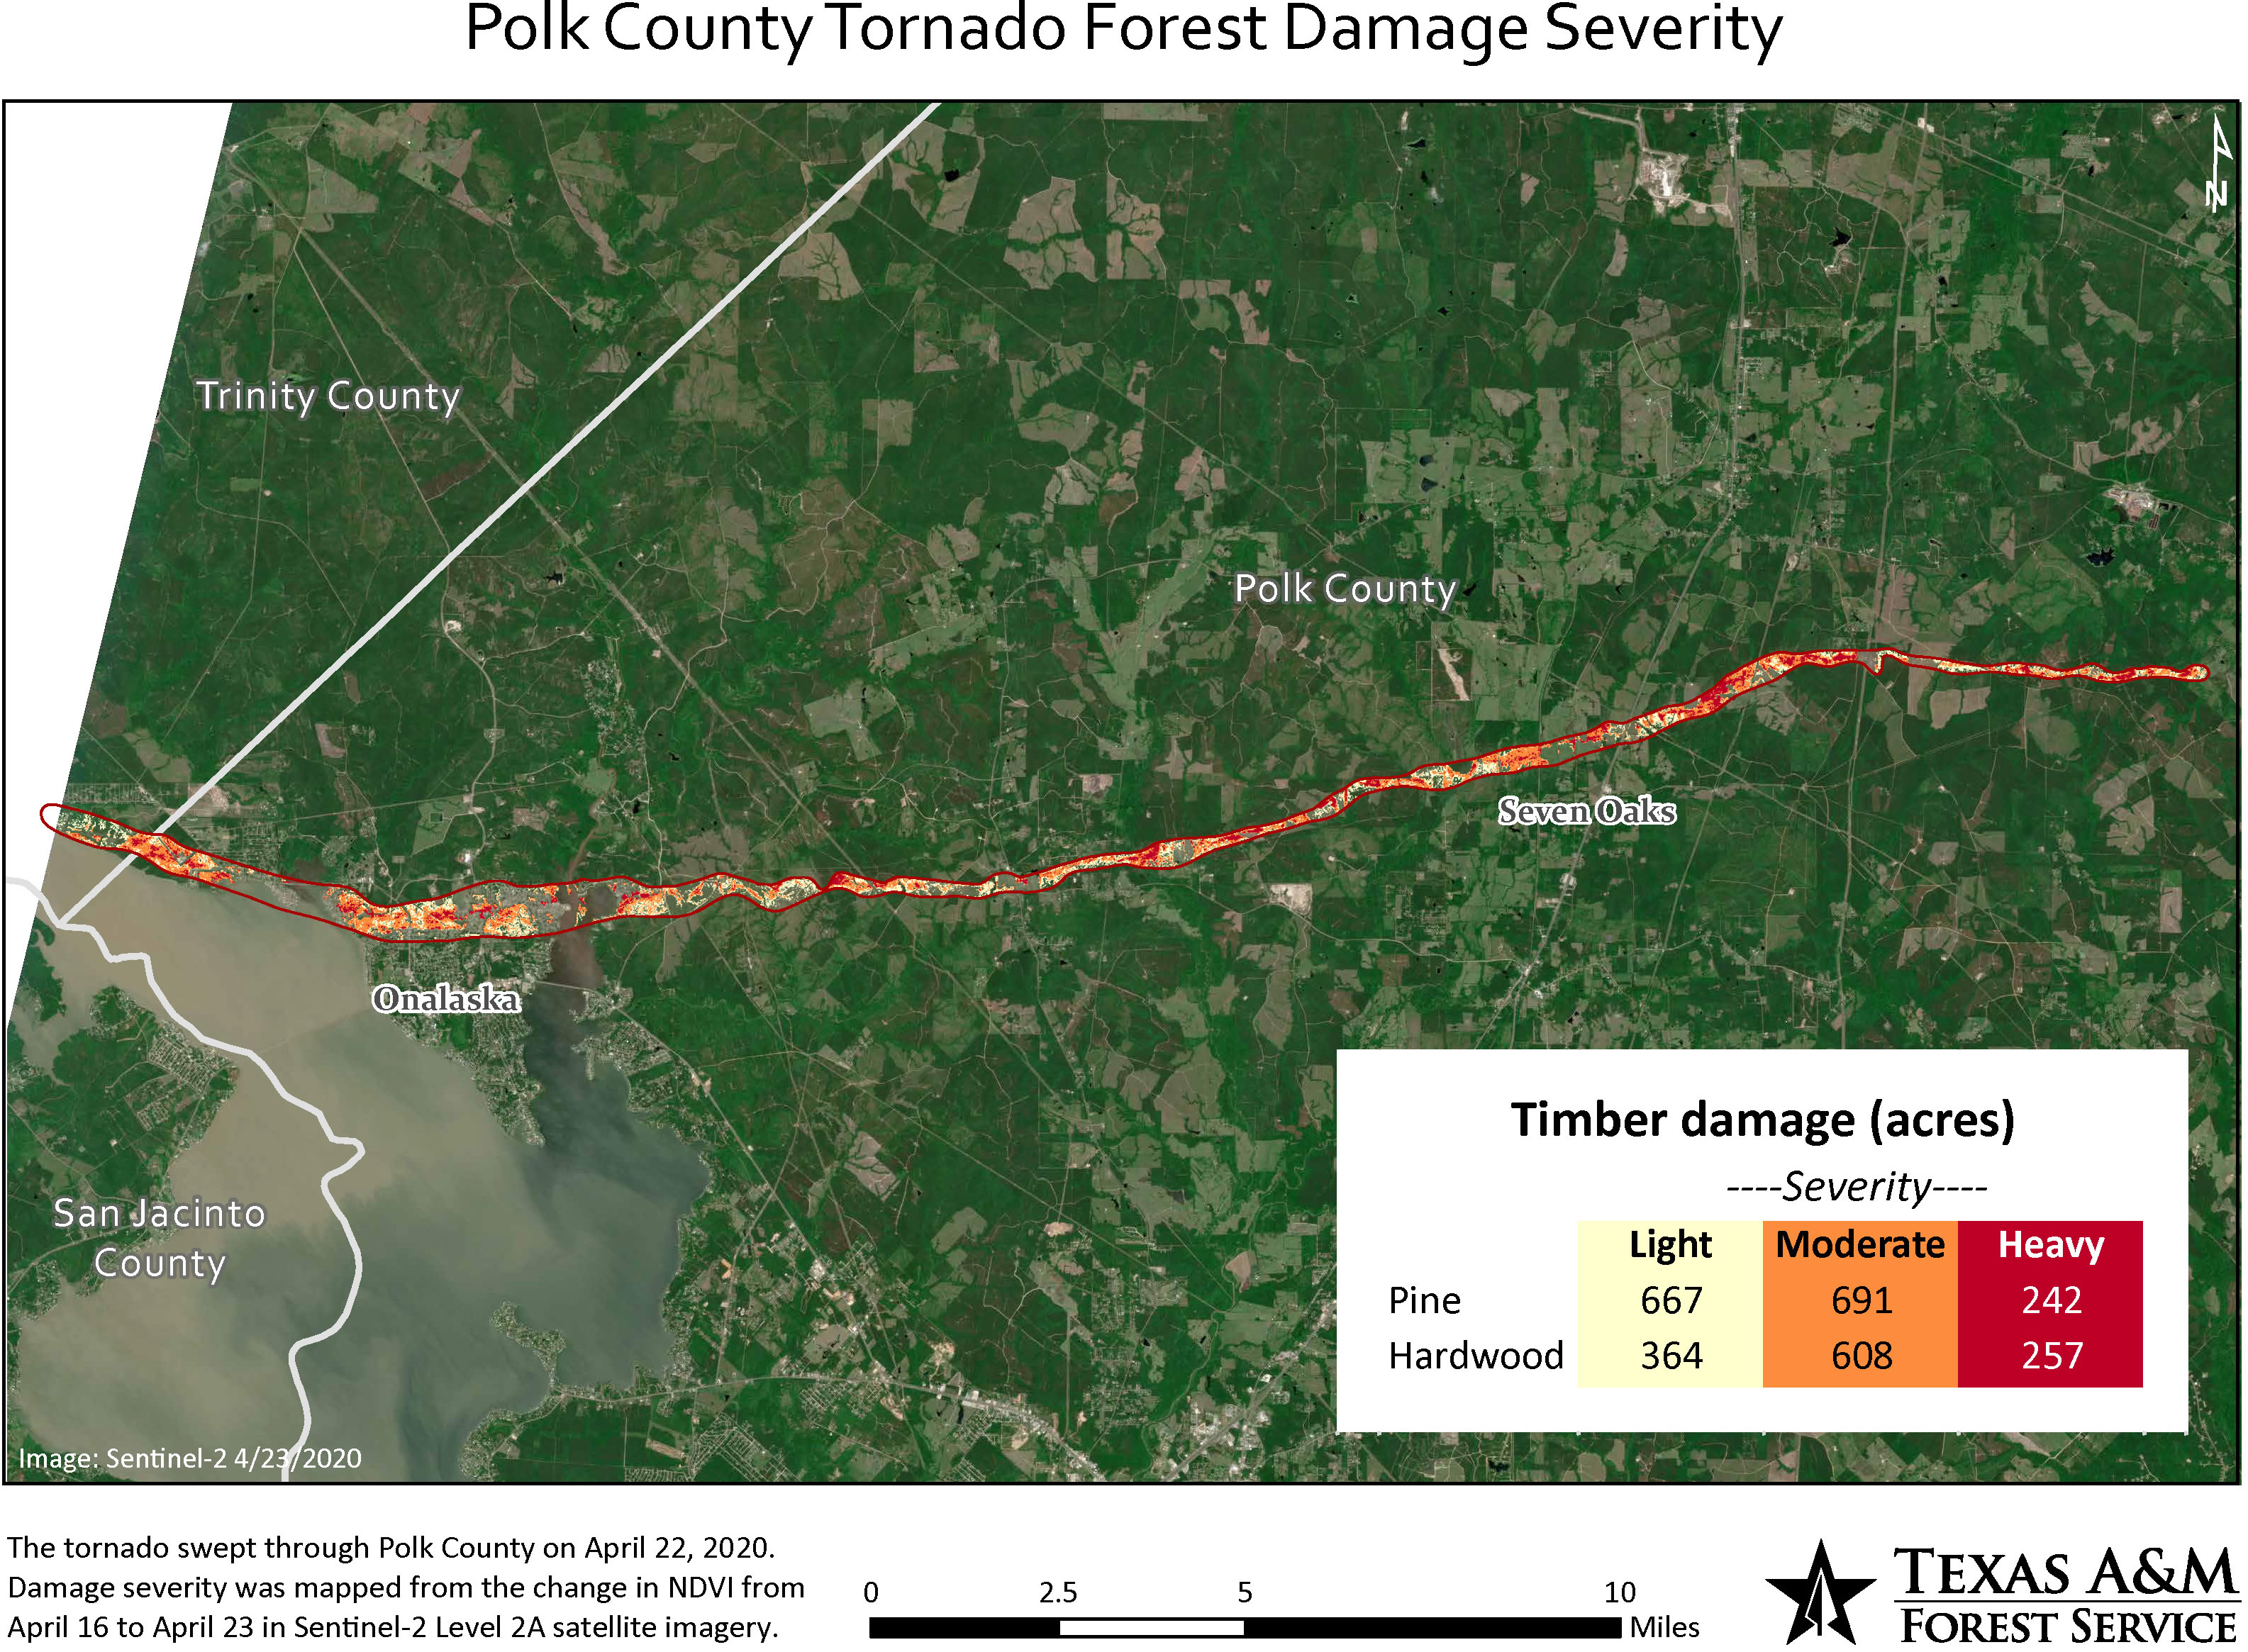 Map showing Polk County tornado damage to forest